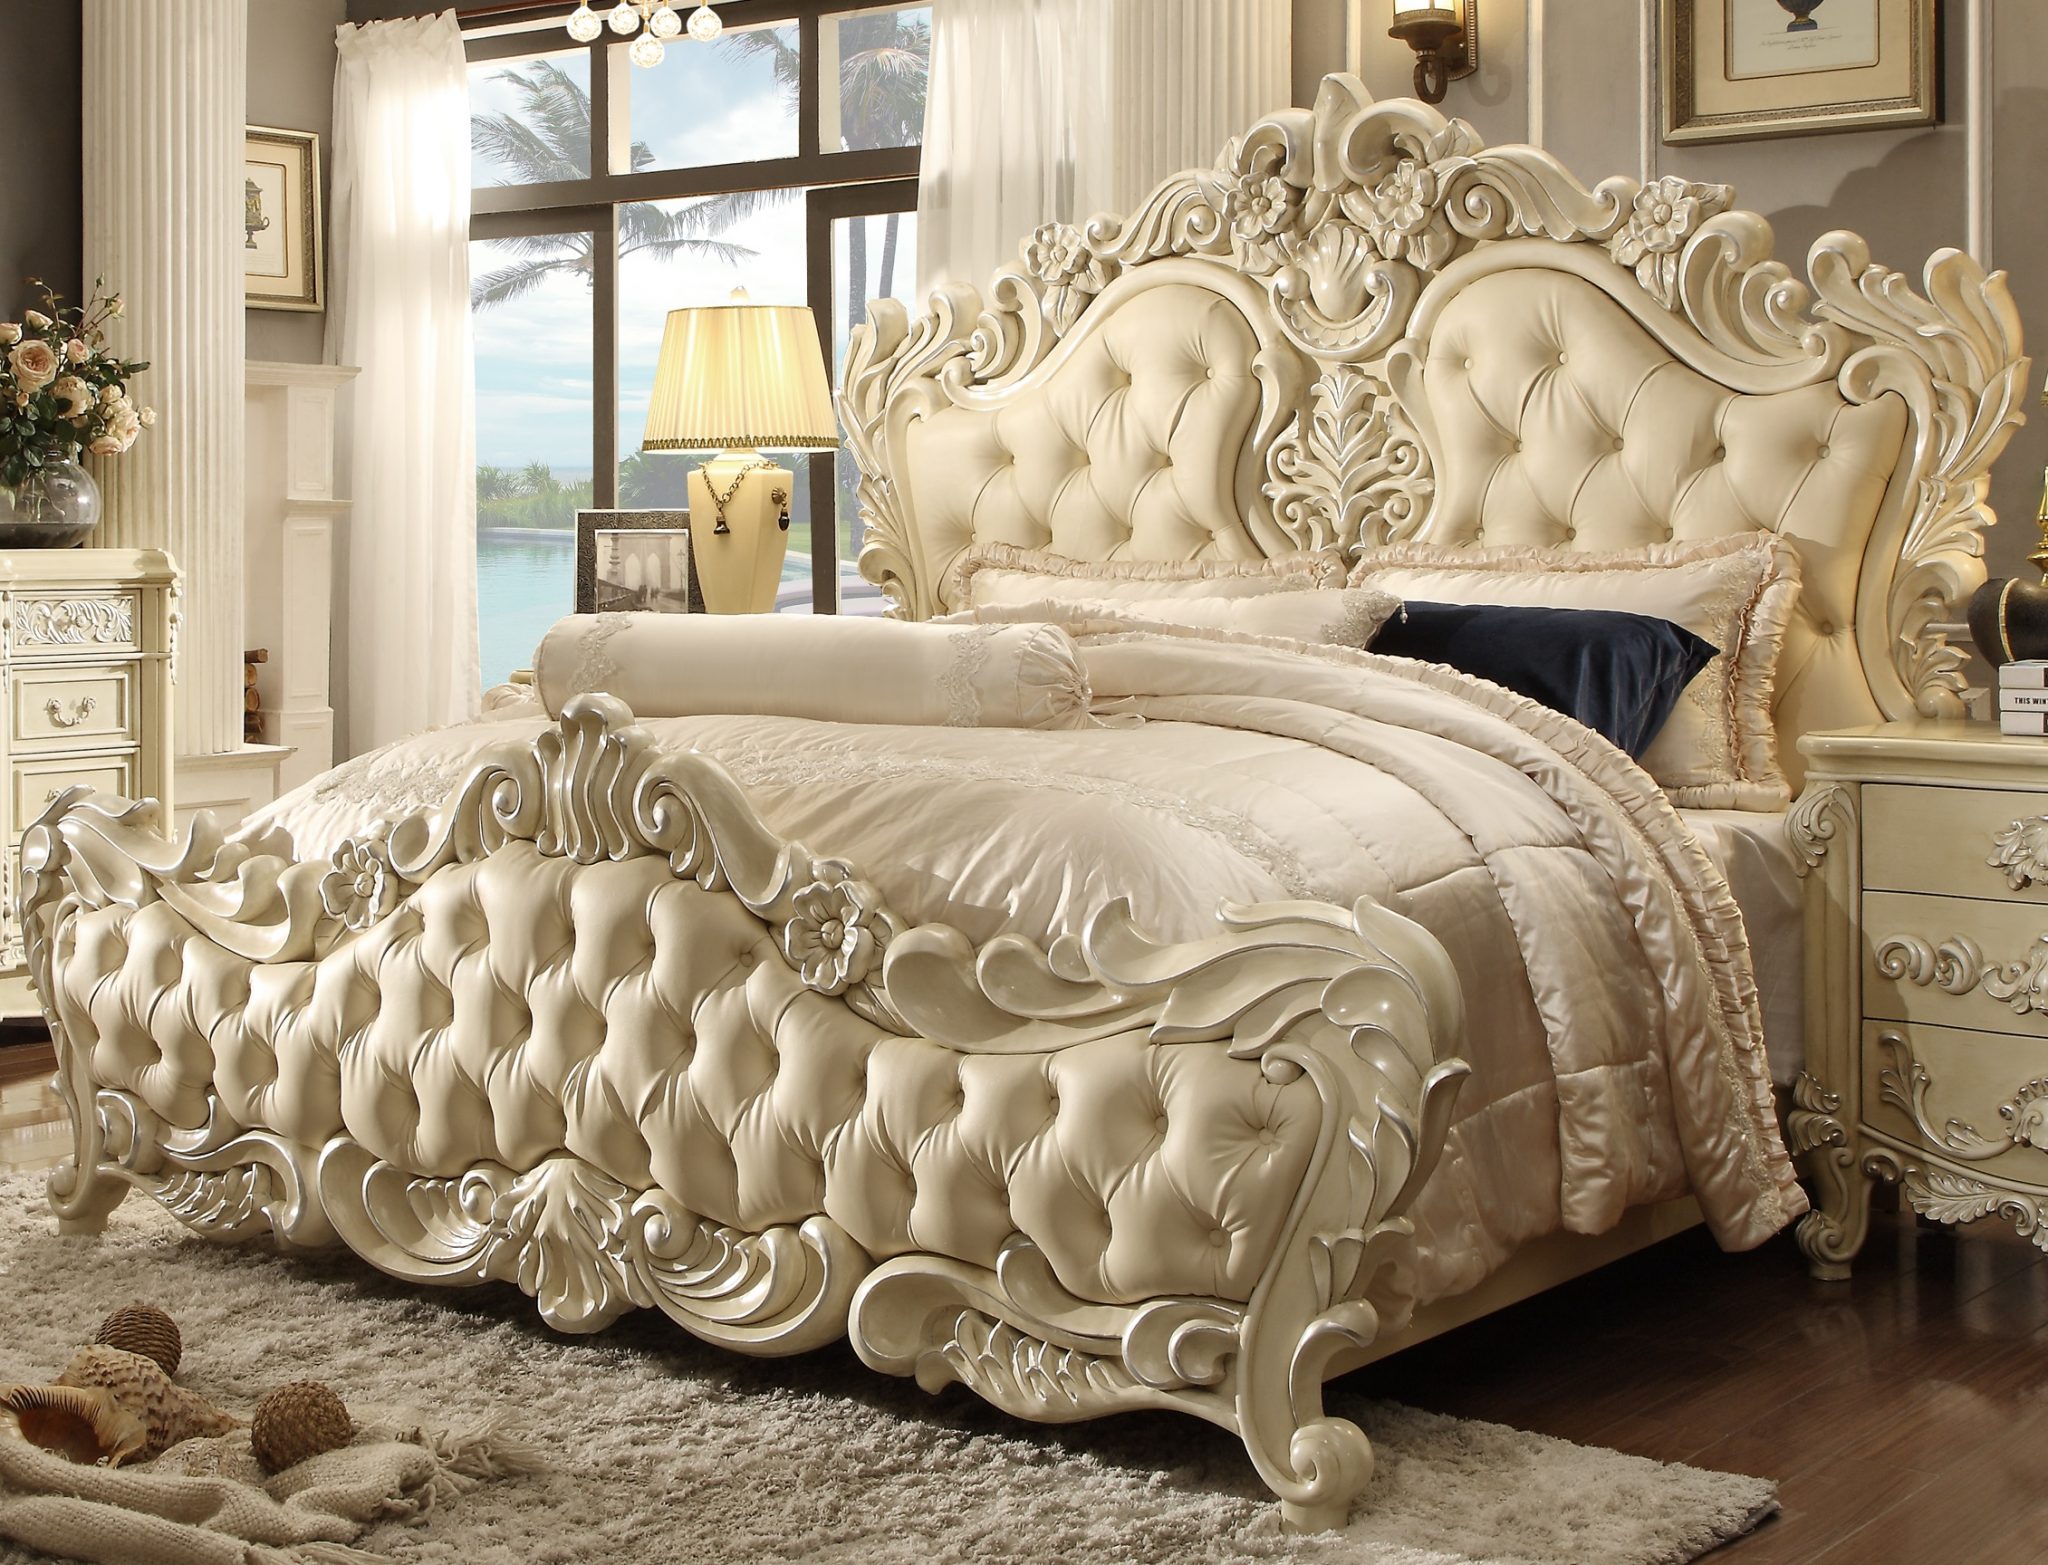 Luxurious carved bed with elegant bedding in an ornate bedroom, ideal as high-definition desktop wallpaper or background.